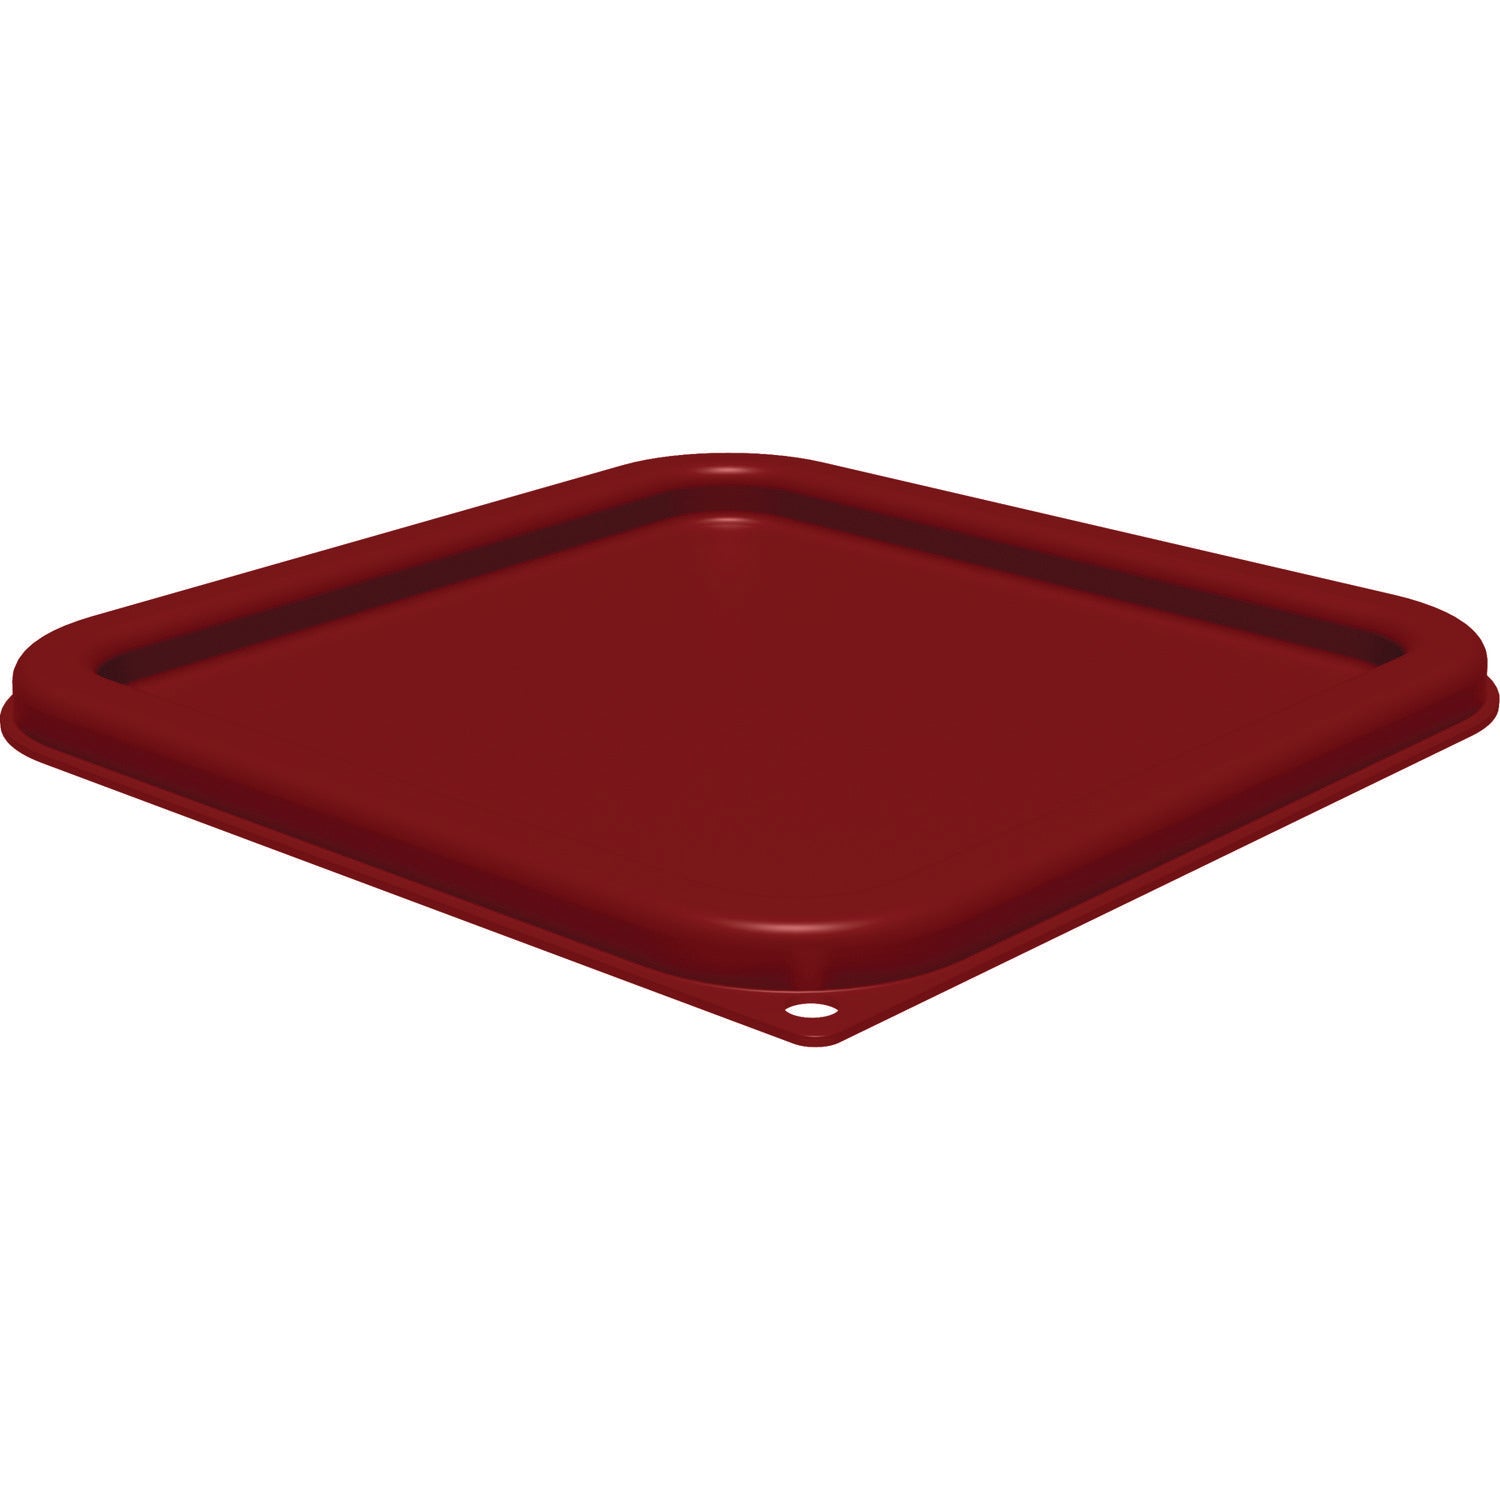 squares-food-storage-container-lid-9-x-9-x-063-red-plastic_cfs1197105 - 1